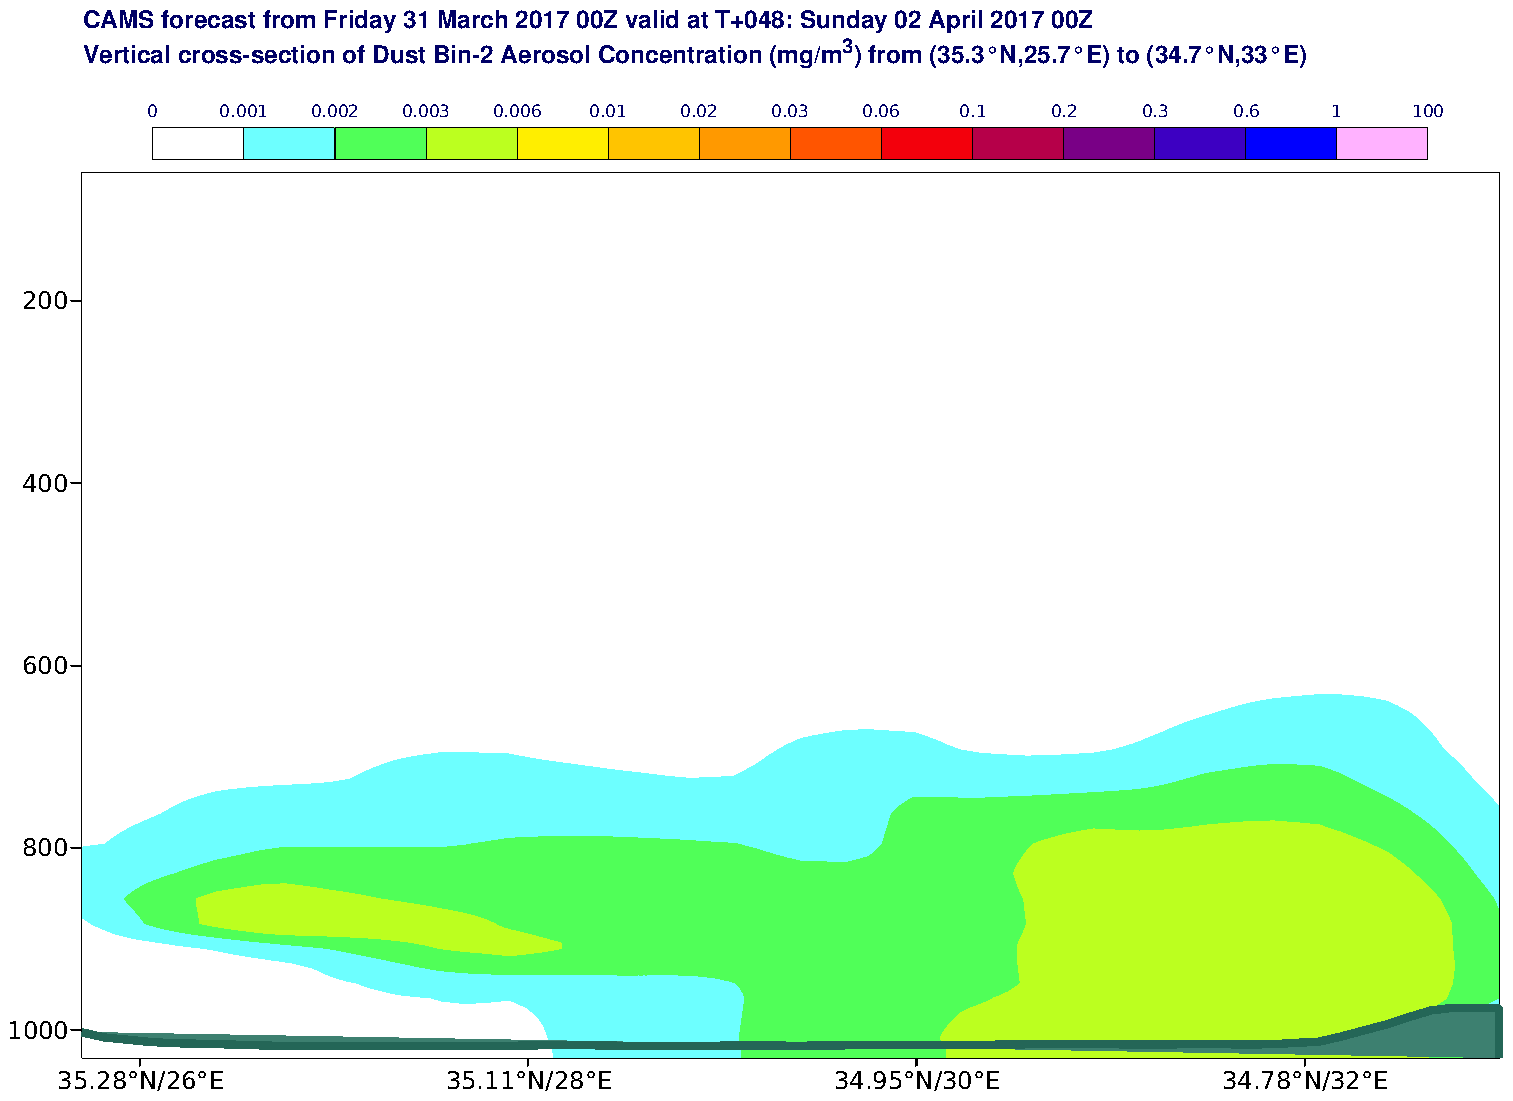 Vertical cross-section of Dust Bin-2 Aerosol Concentration (mg/m3) valid at T48 - 2017-04-02 00:00